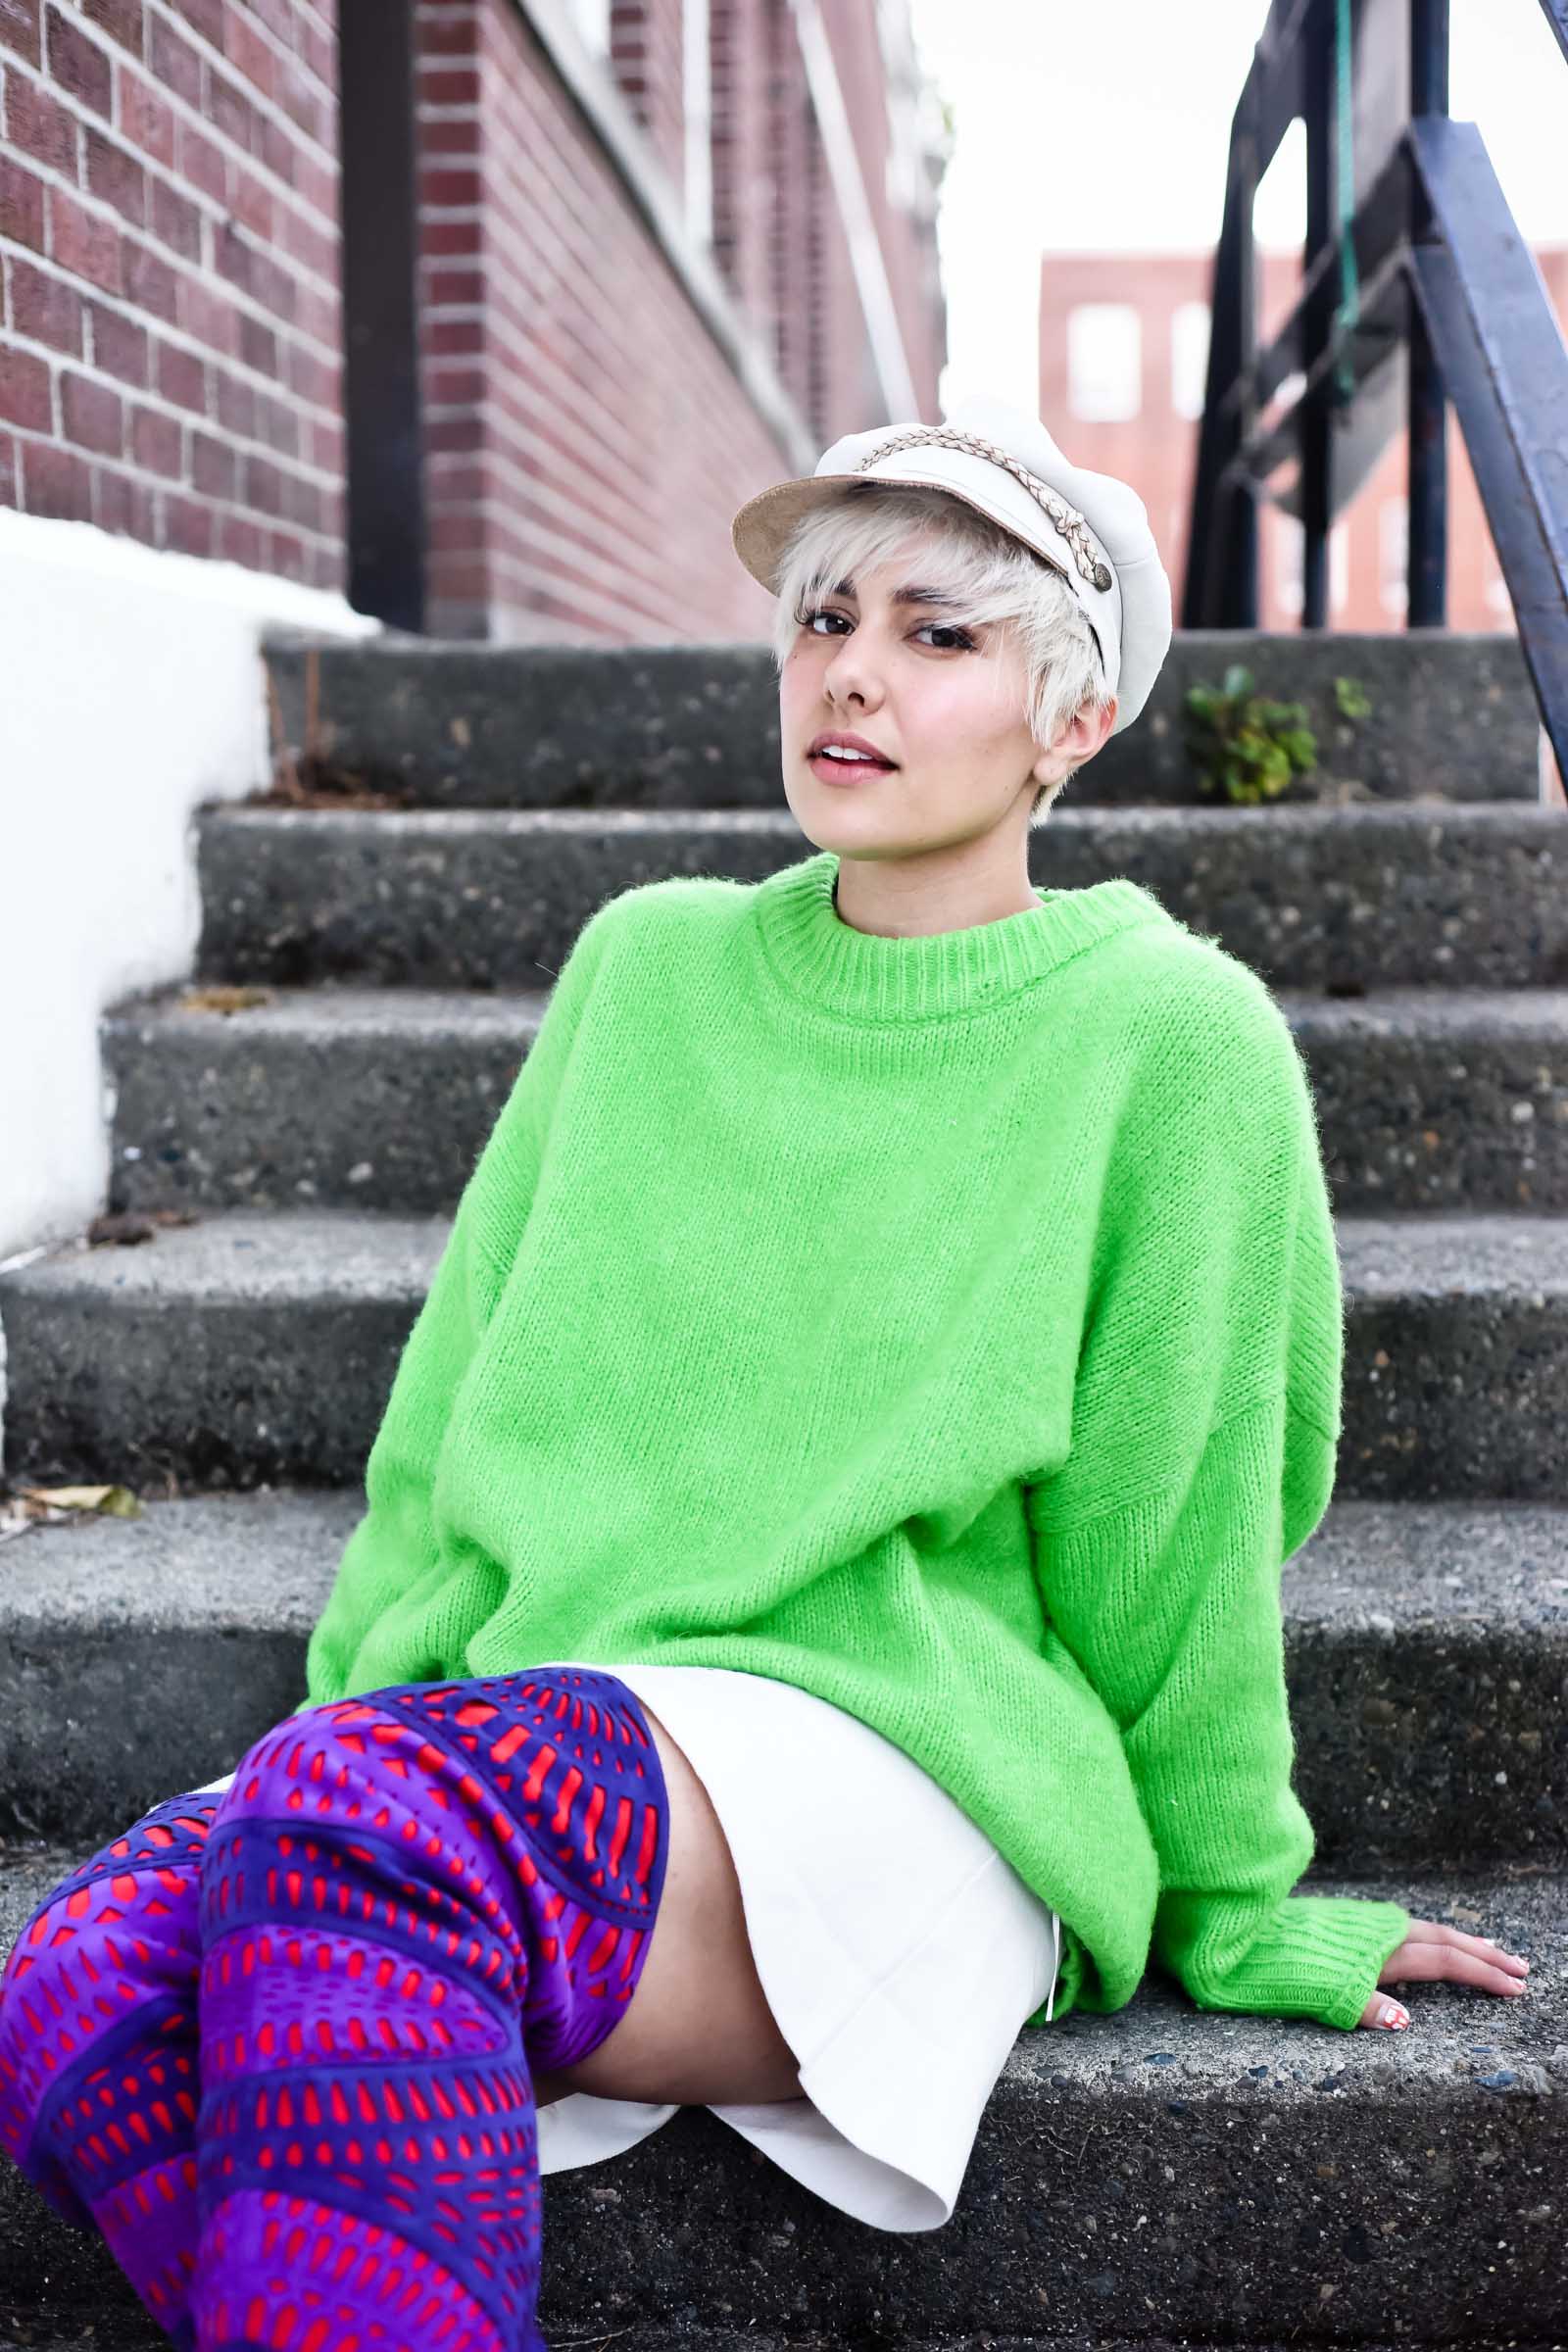 It’s Easy Being Green: Styling an Oversized Green Sweater Part 2